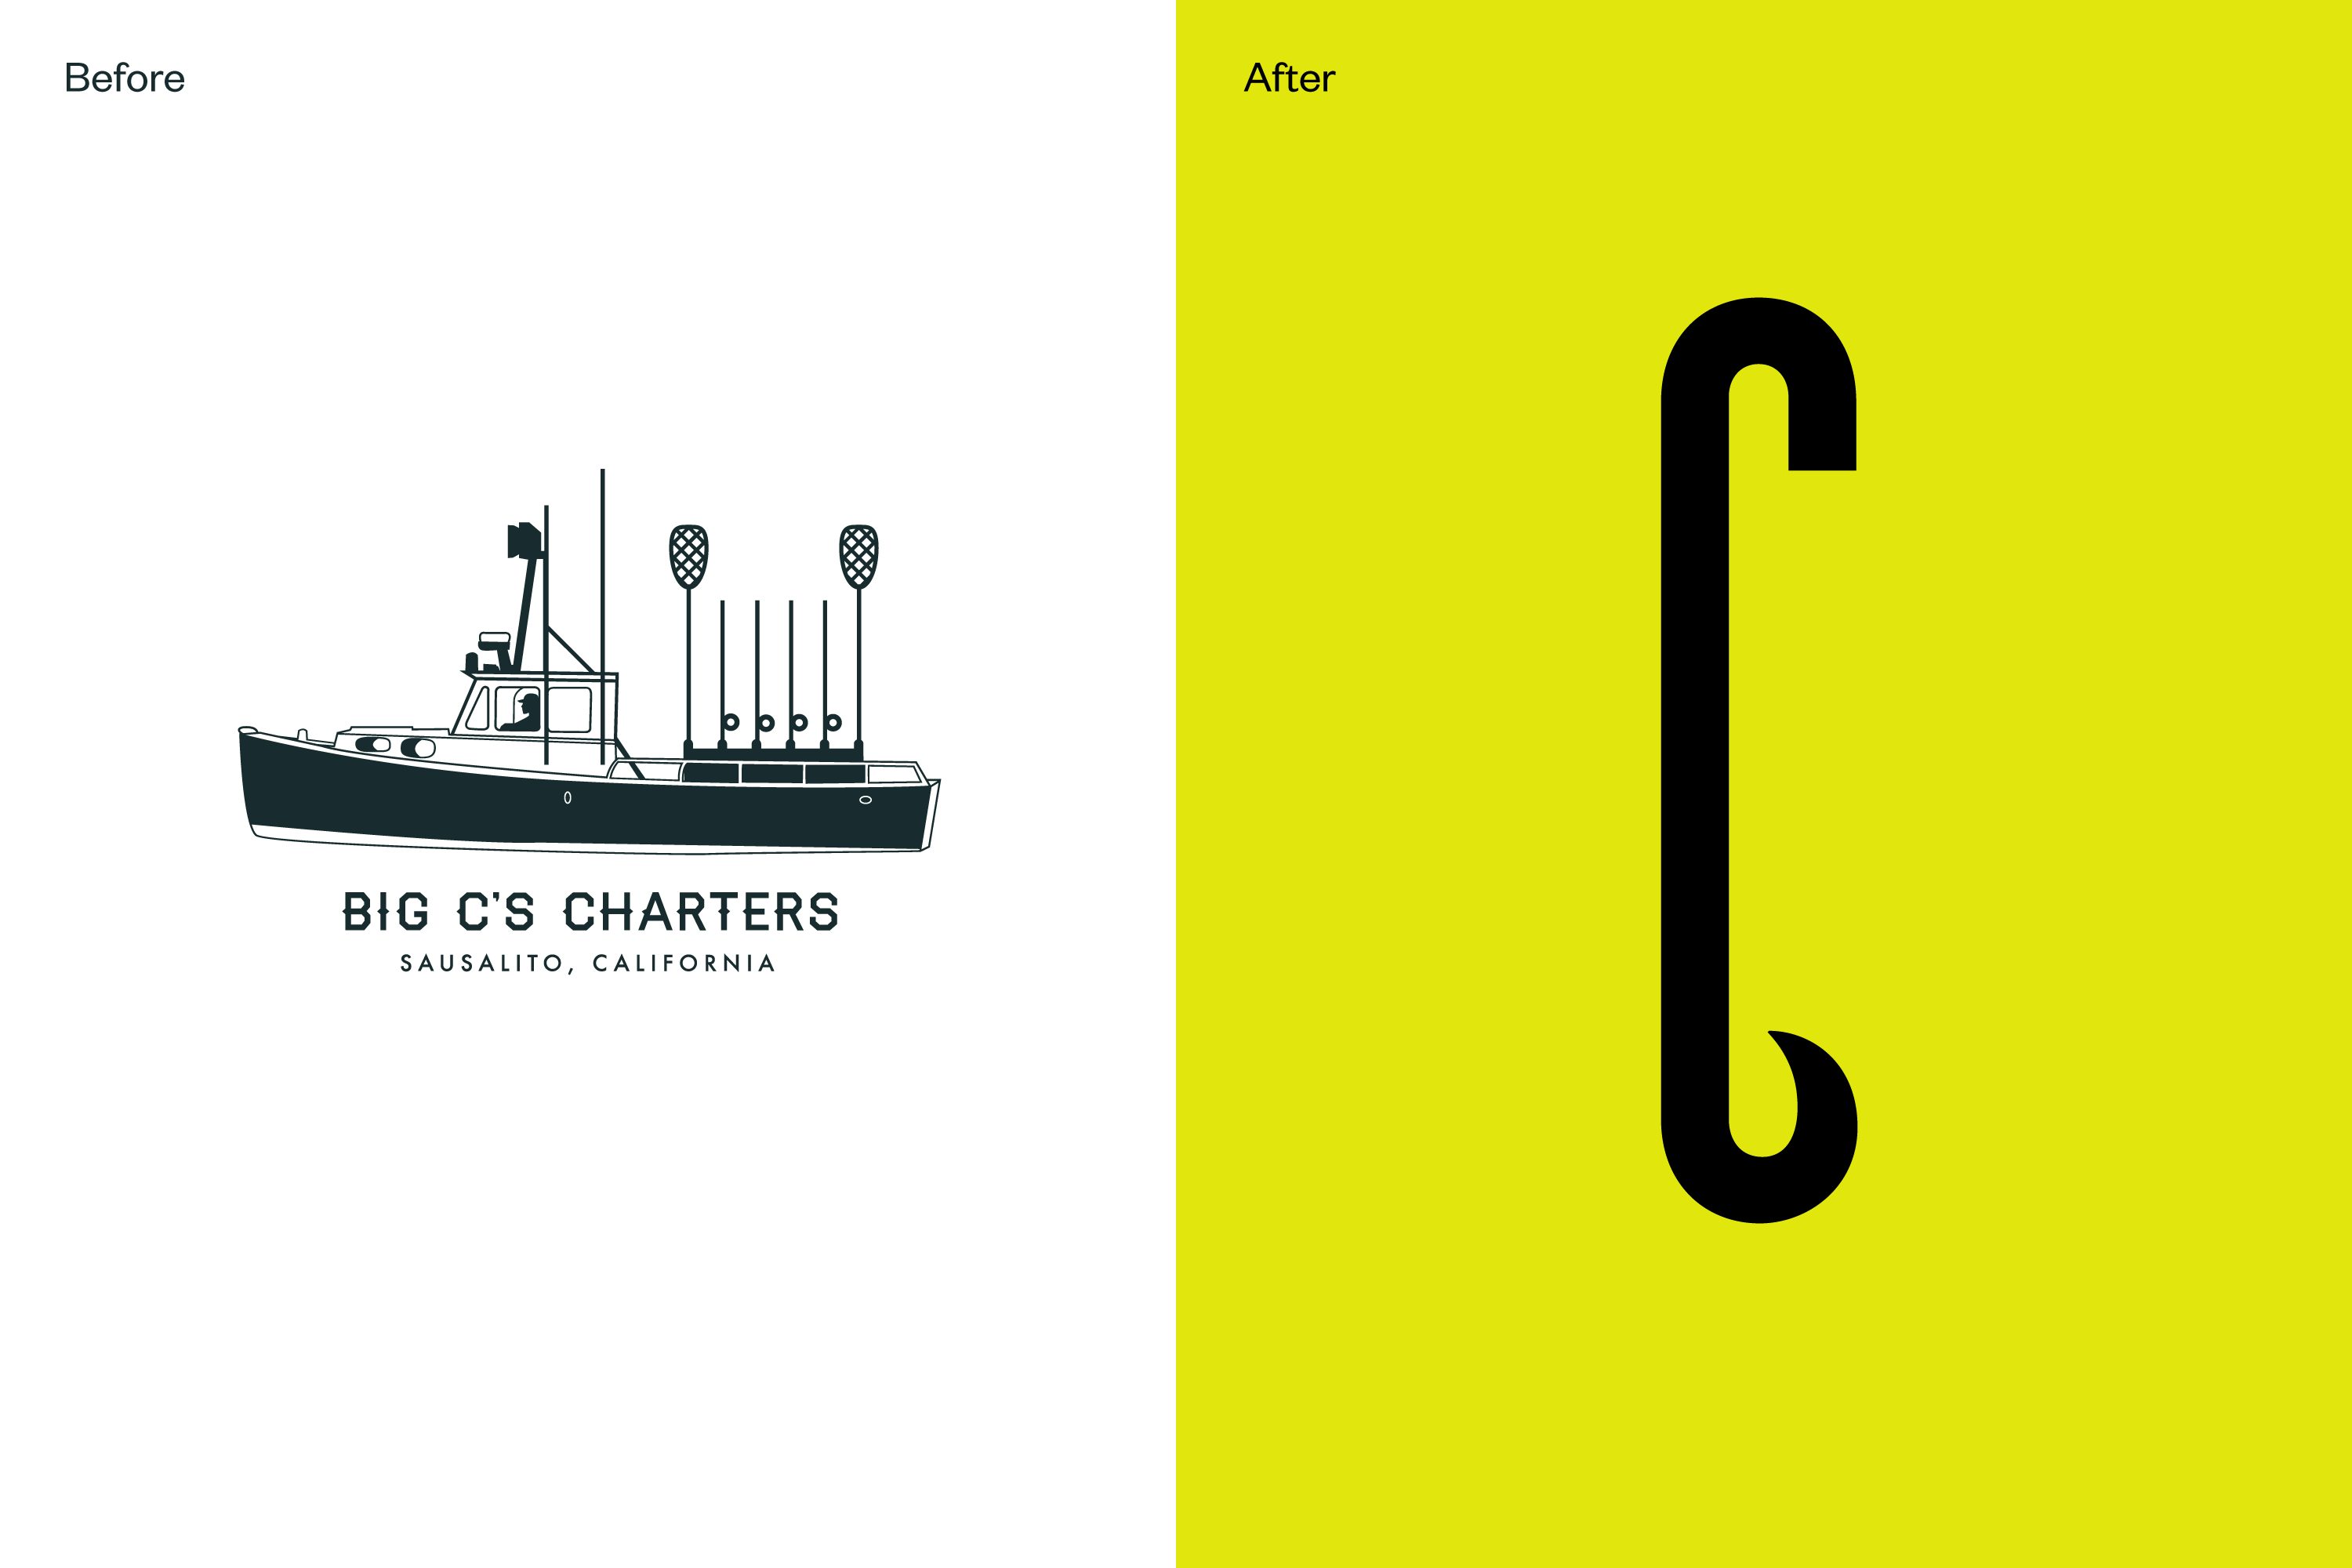 Graphic of the old Big C Charters logo featuring a boat, and the new logo of an elongated 'C'